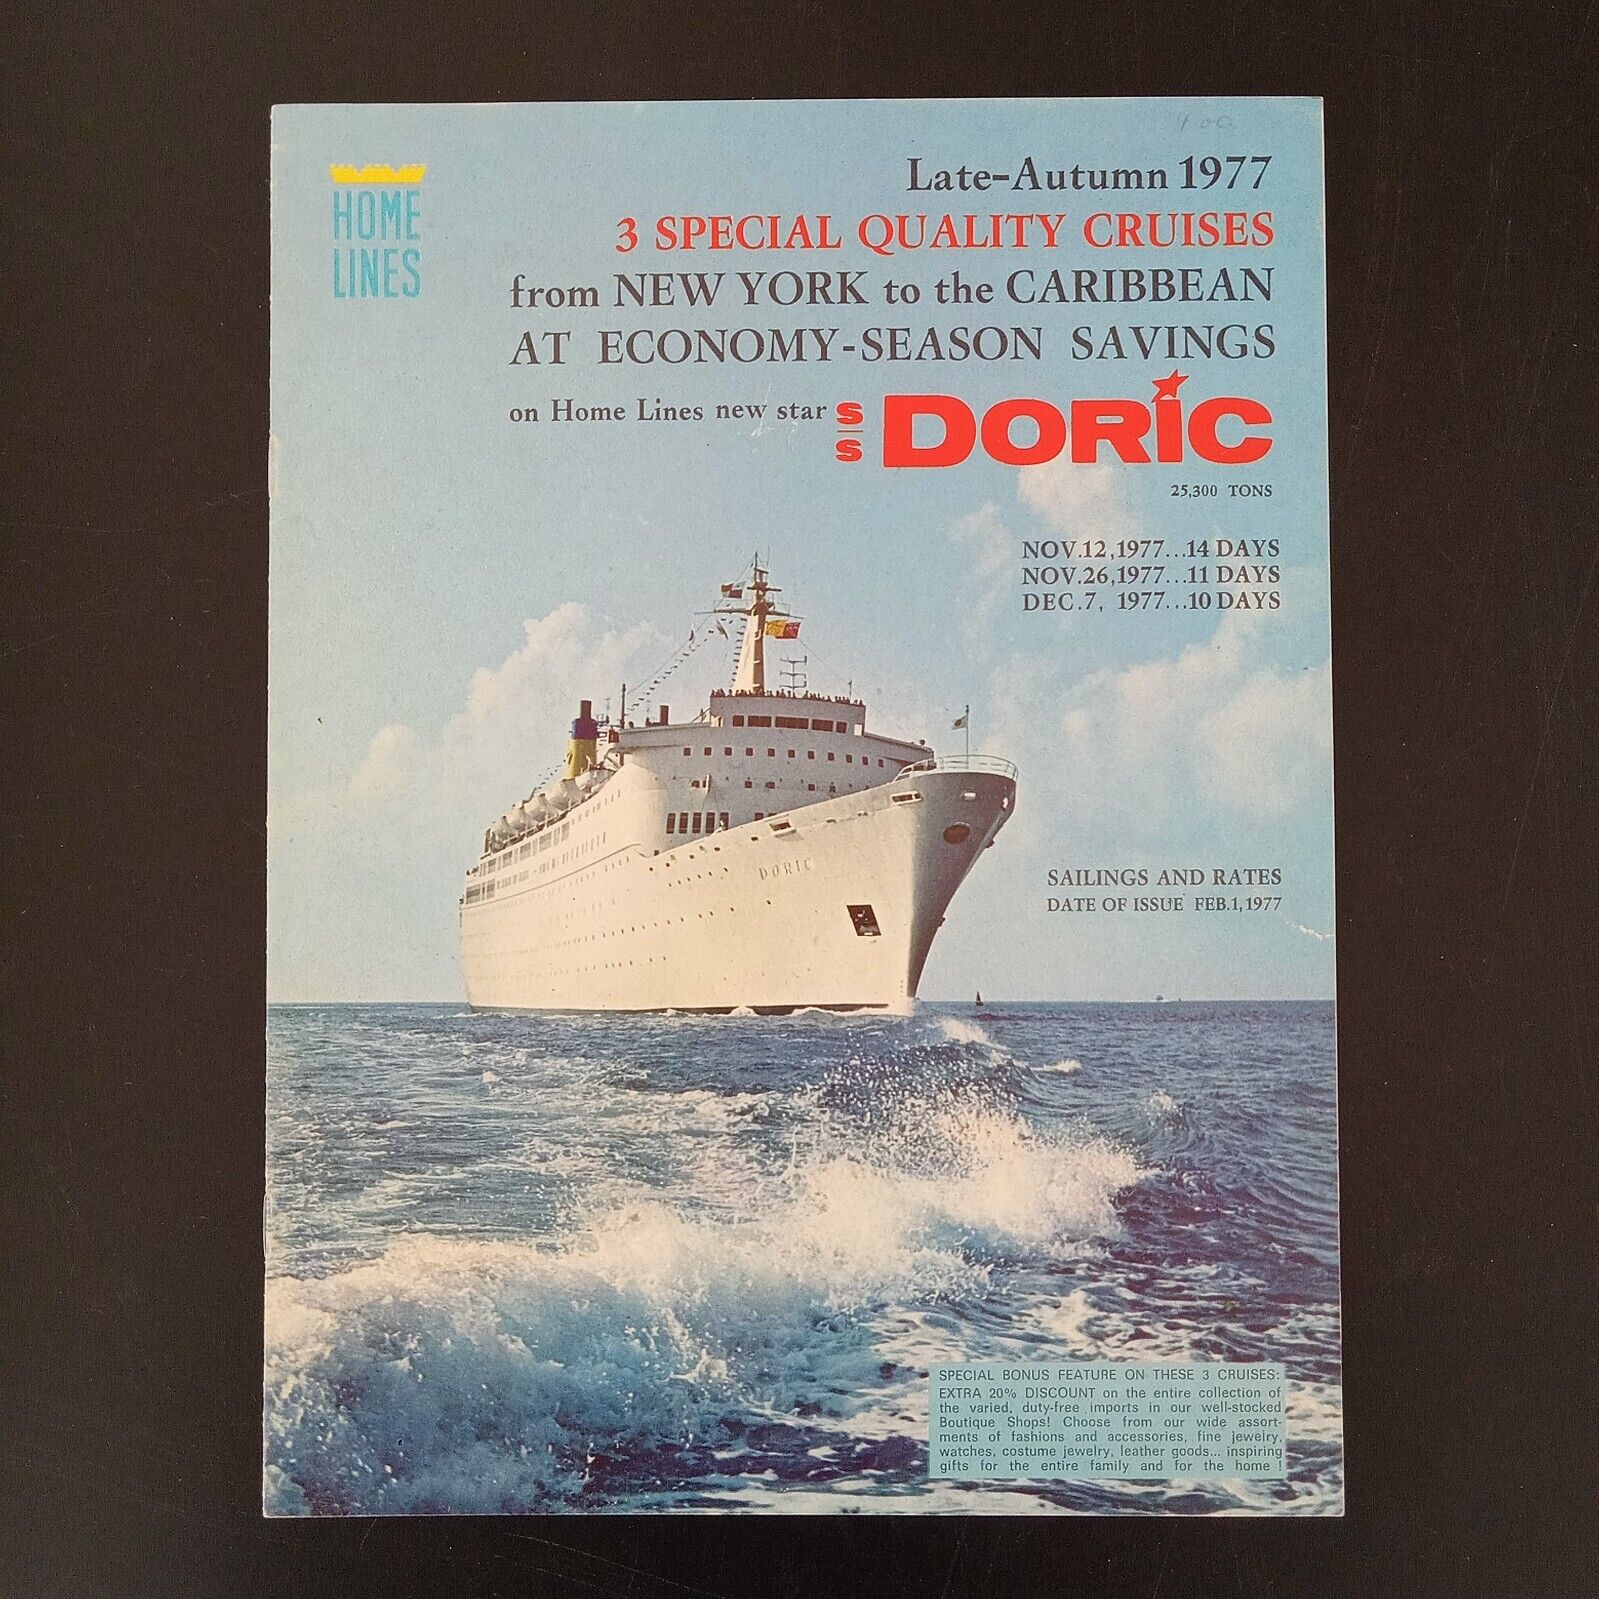 SS DORIC Home Lines Cruise 1977 Brochure Deck Plans Rates Activities